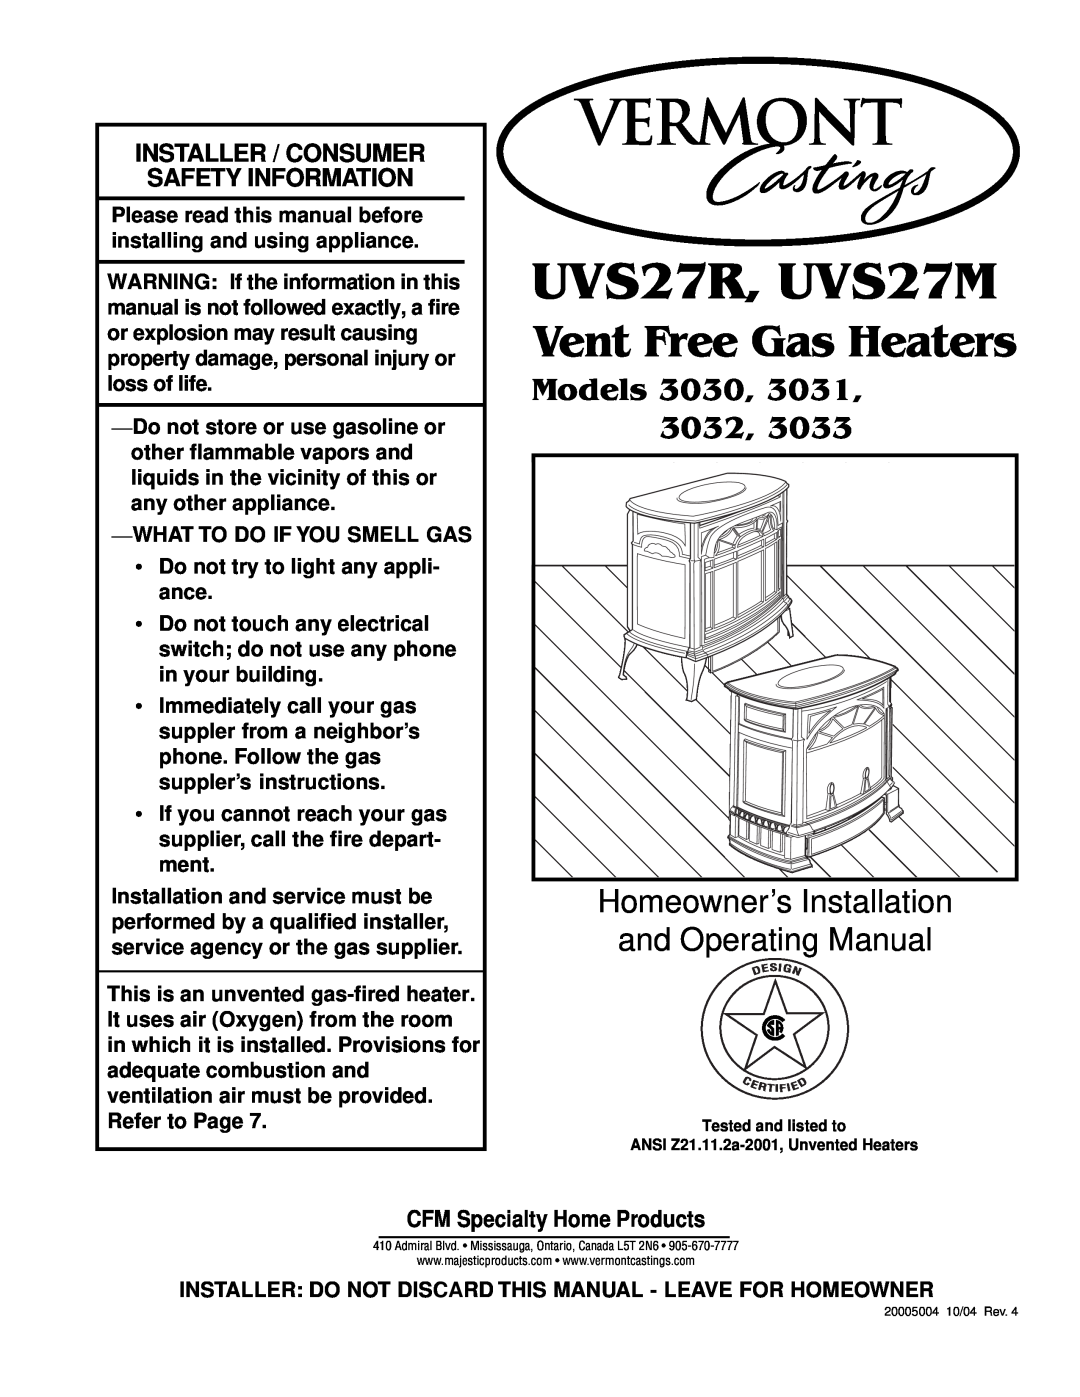 Vermont Casting 3030 manual Homeowner’s Installation, Whatto Do If You Smell Gas, Do not try to light any appli- ance 